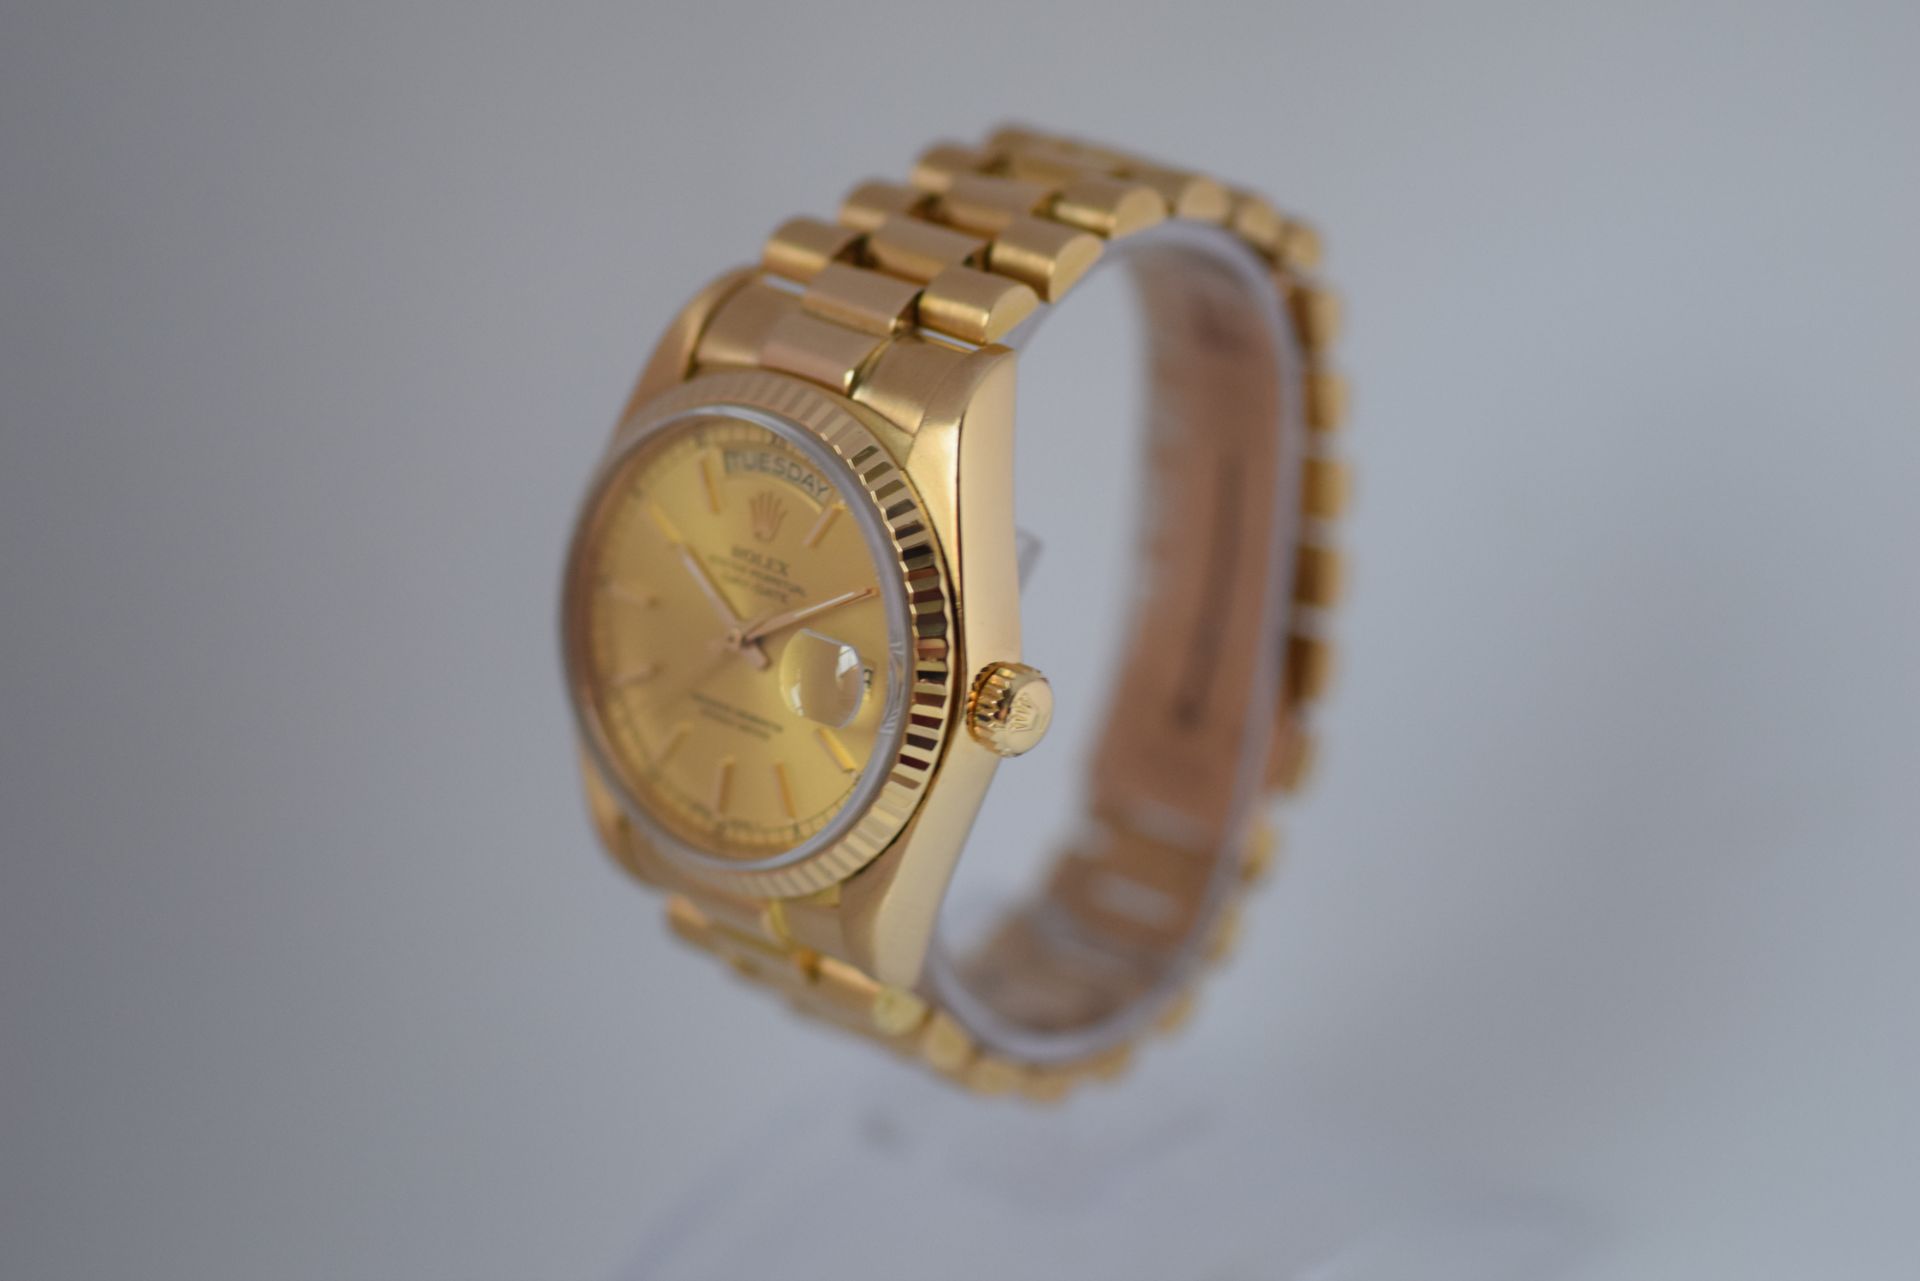 Rolex day date 18038 president 18ct solid gold - Image 2 of 10